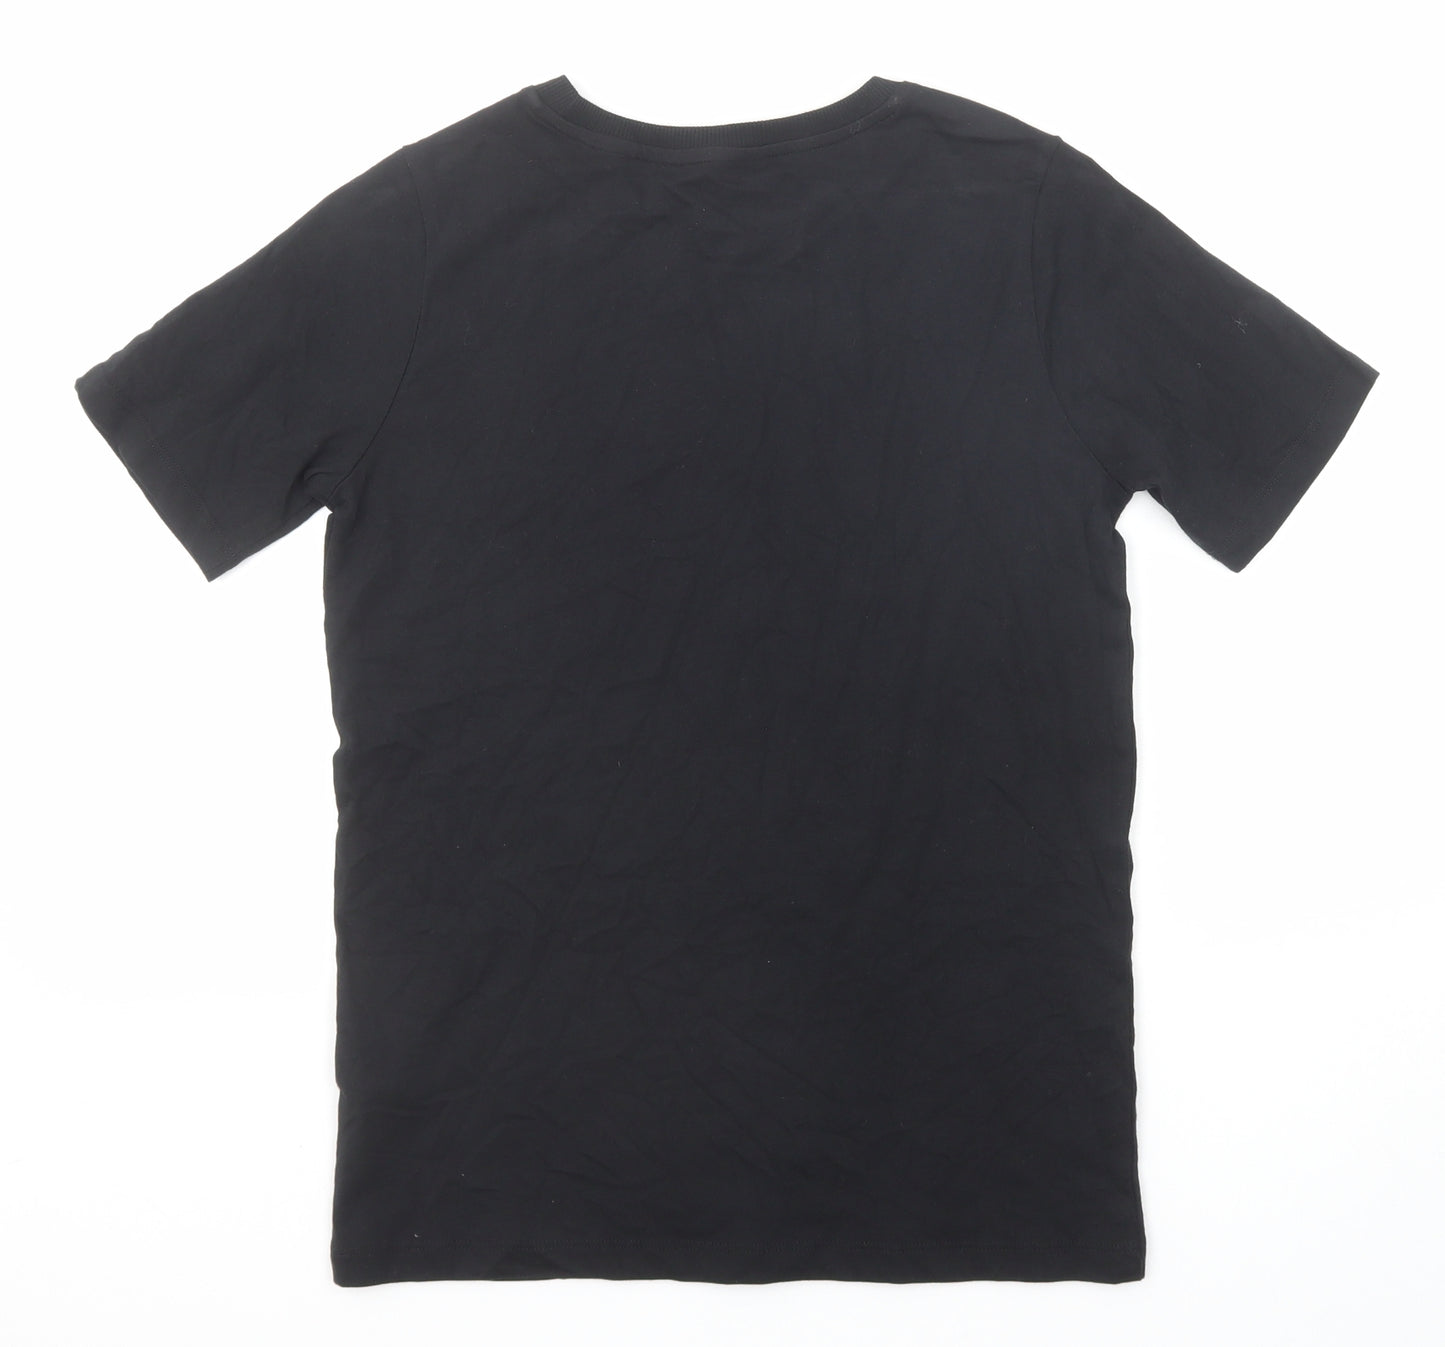 Marks and Spencer Boys Black Cotton Basic T-Shirt Size 11-12 Years Round Neck Pullover